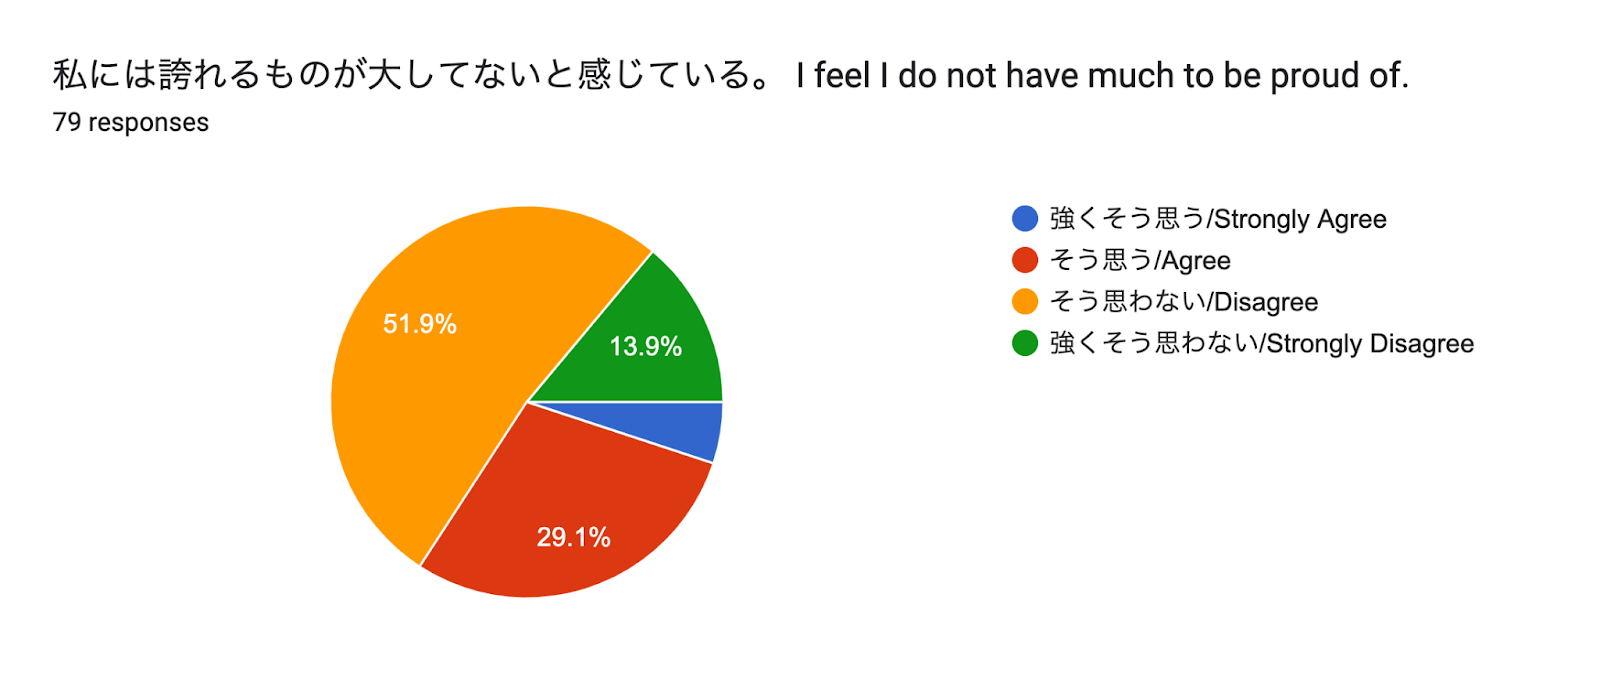 Forms response chart. Question title: 私には誇れるものが大してないと感じている。
I feel I do not have much to be proud of.
. Number of responses: 79 responses.